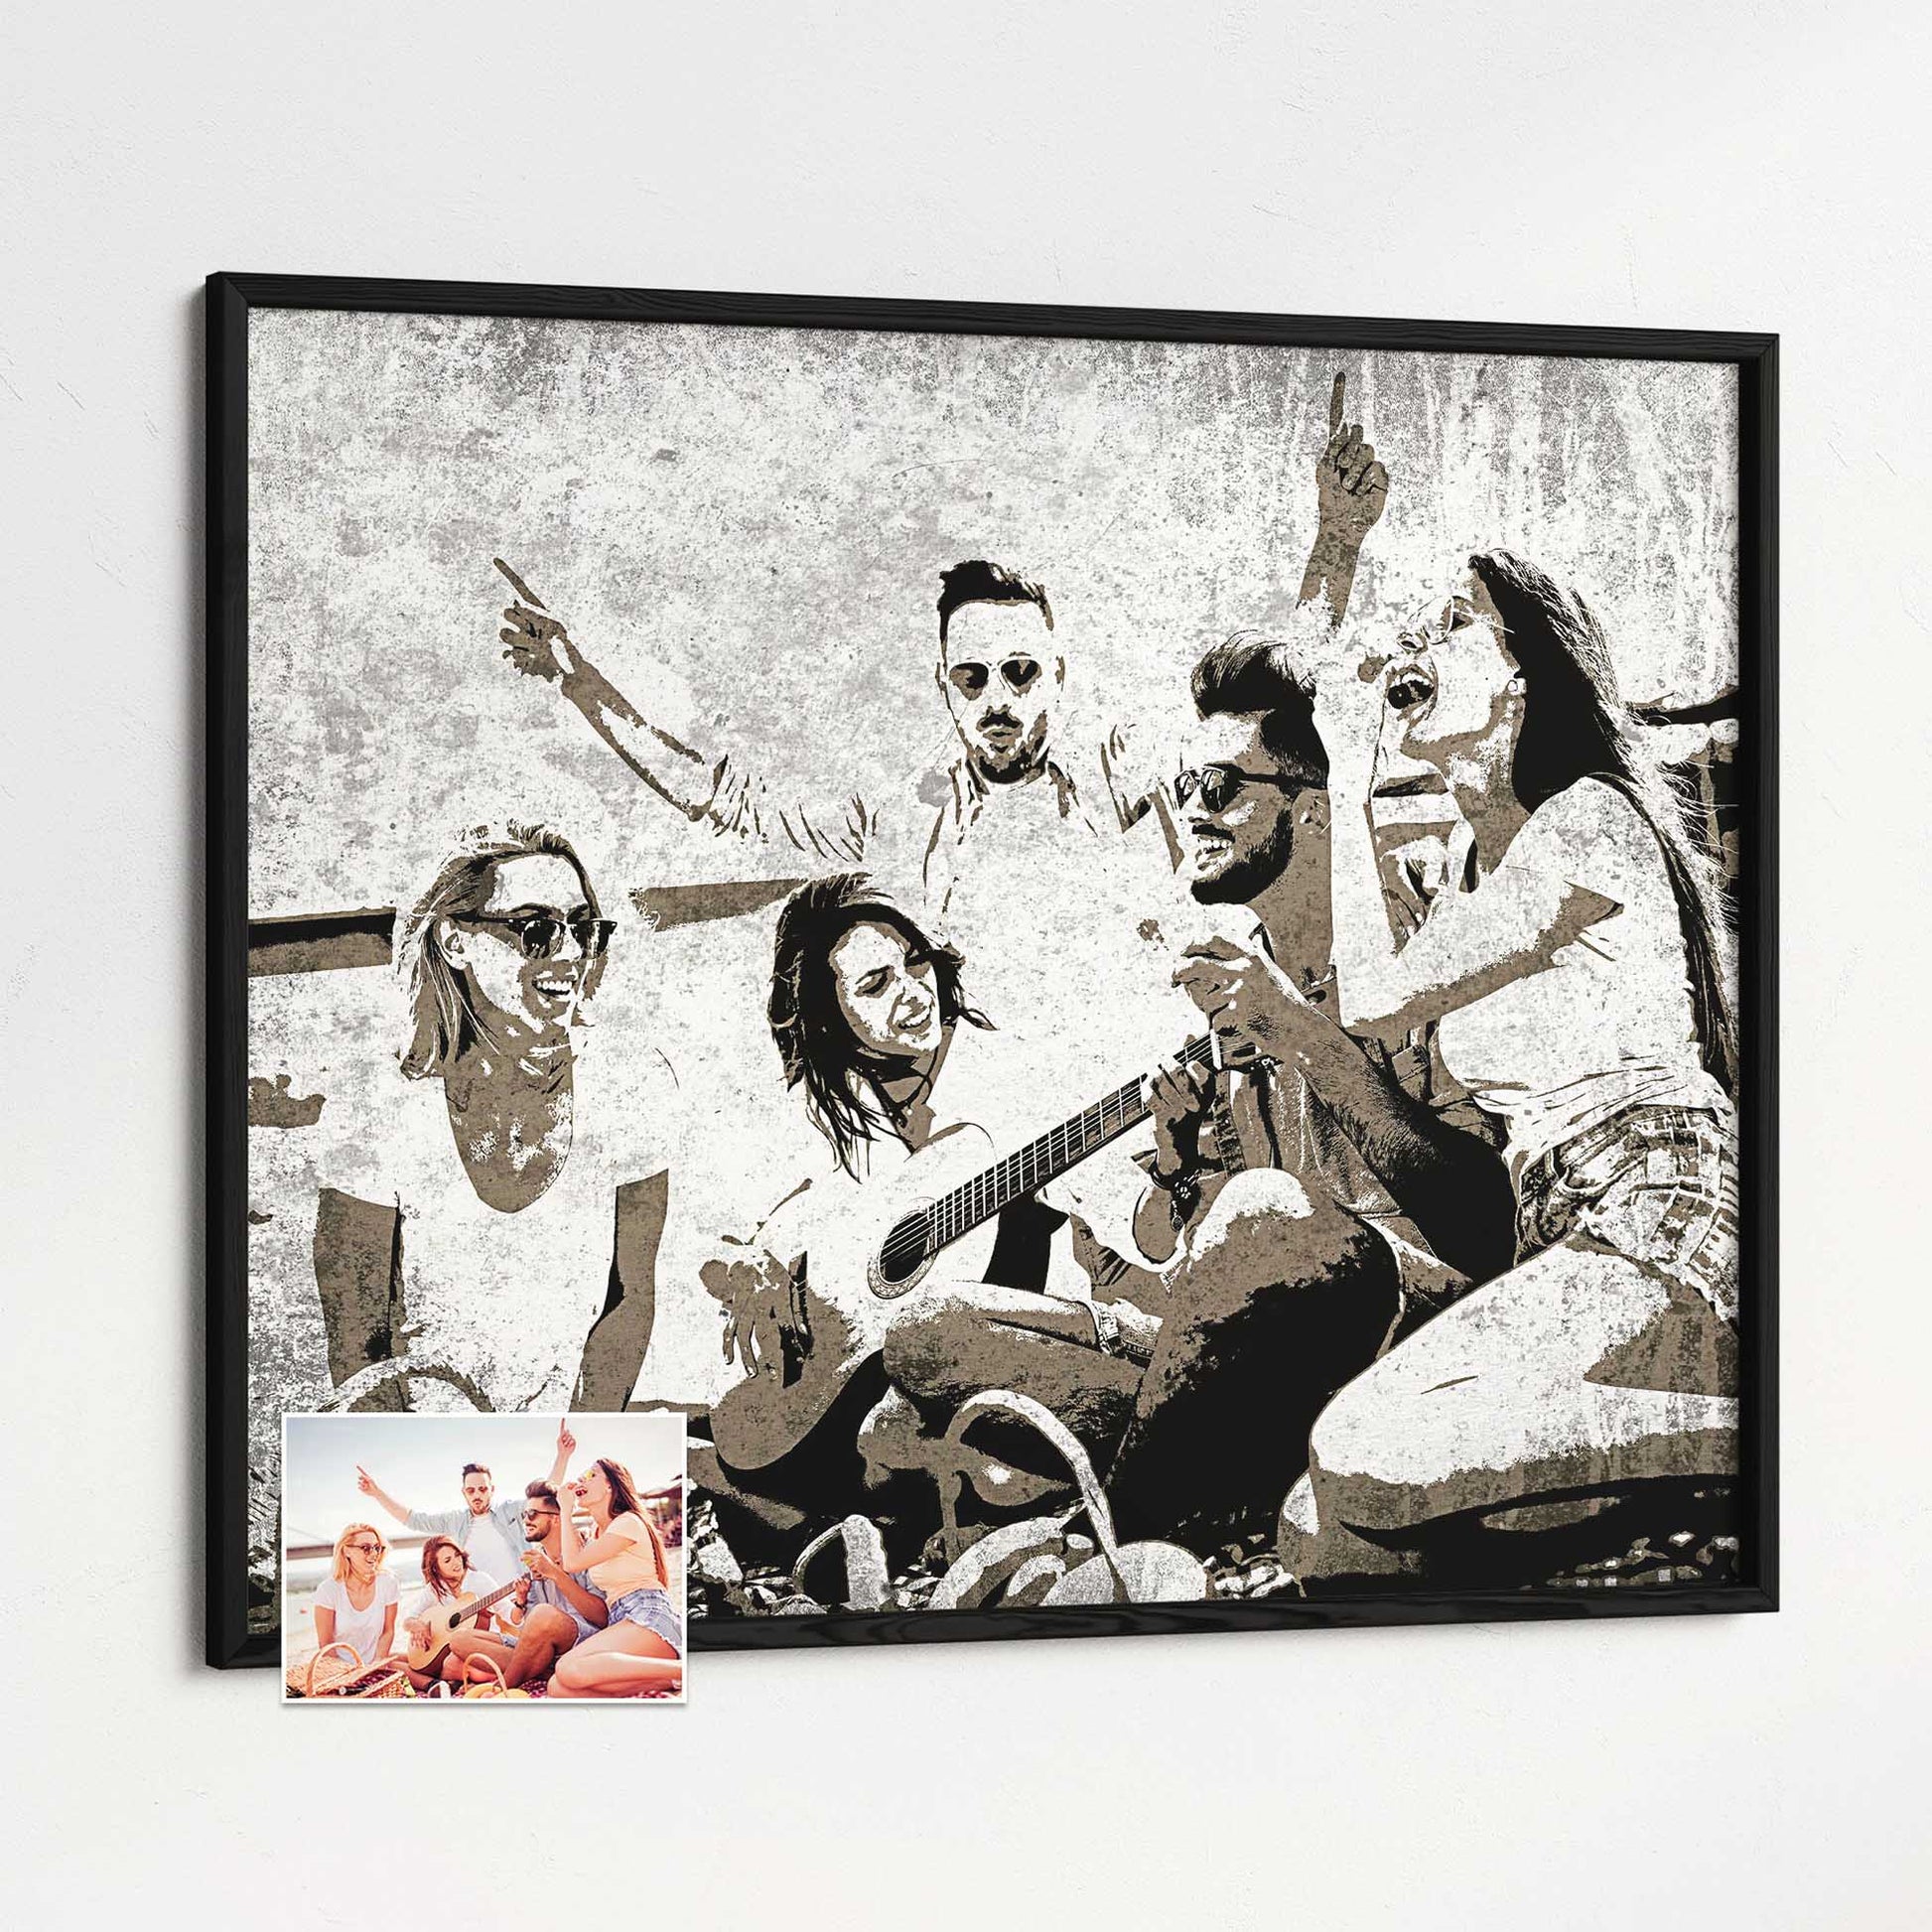 Personalise your space with the captivating allure of our Black & White Graffiti Street Art Framed Print. Created from your photo, this unique artwork embraces the urban aesthetic with its original street art style, minimalist design